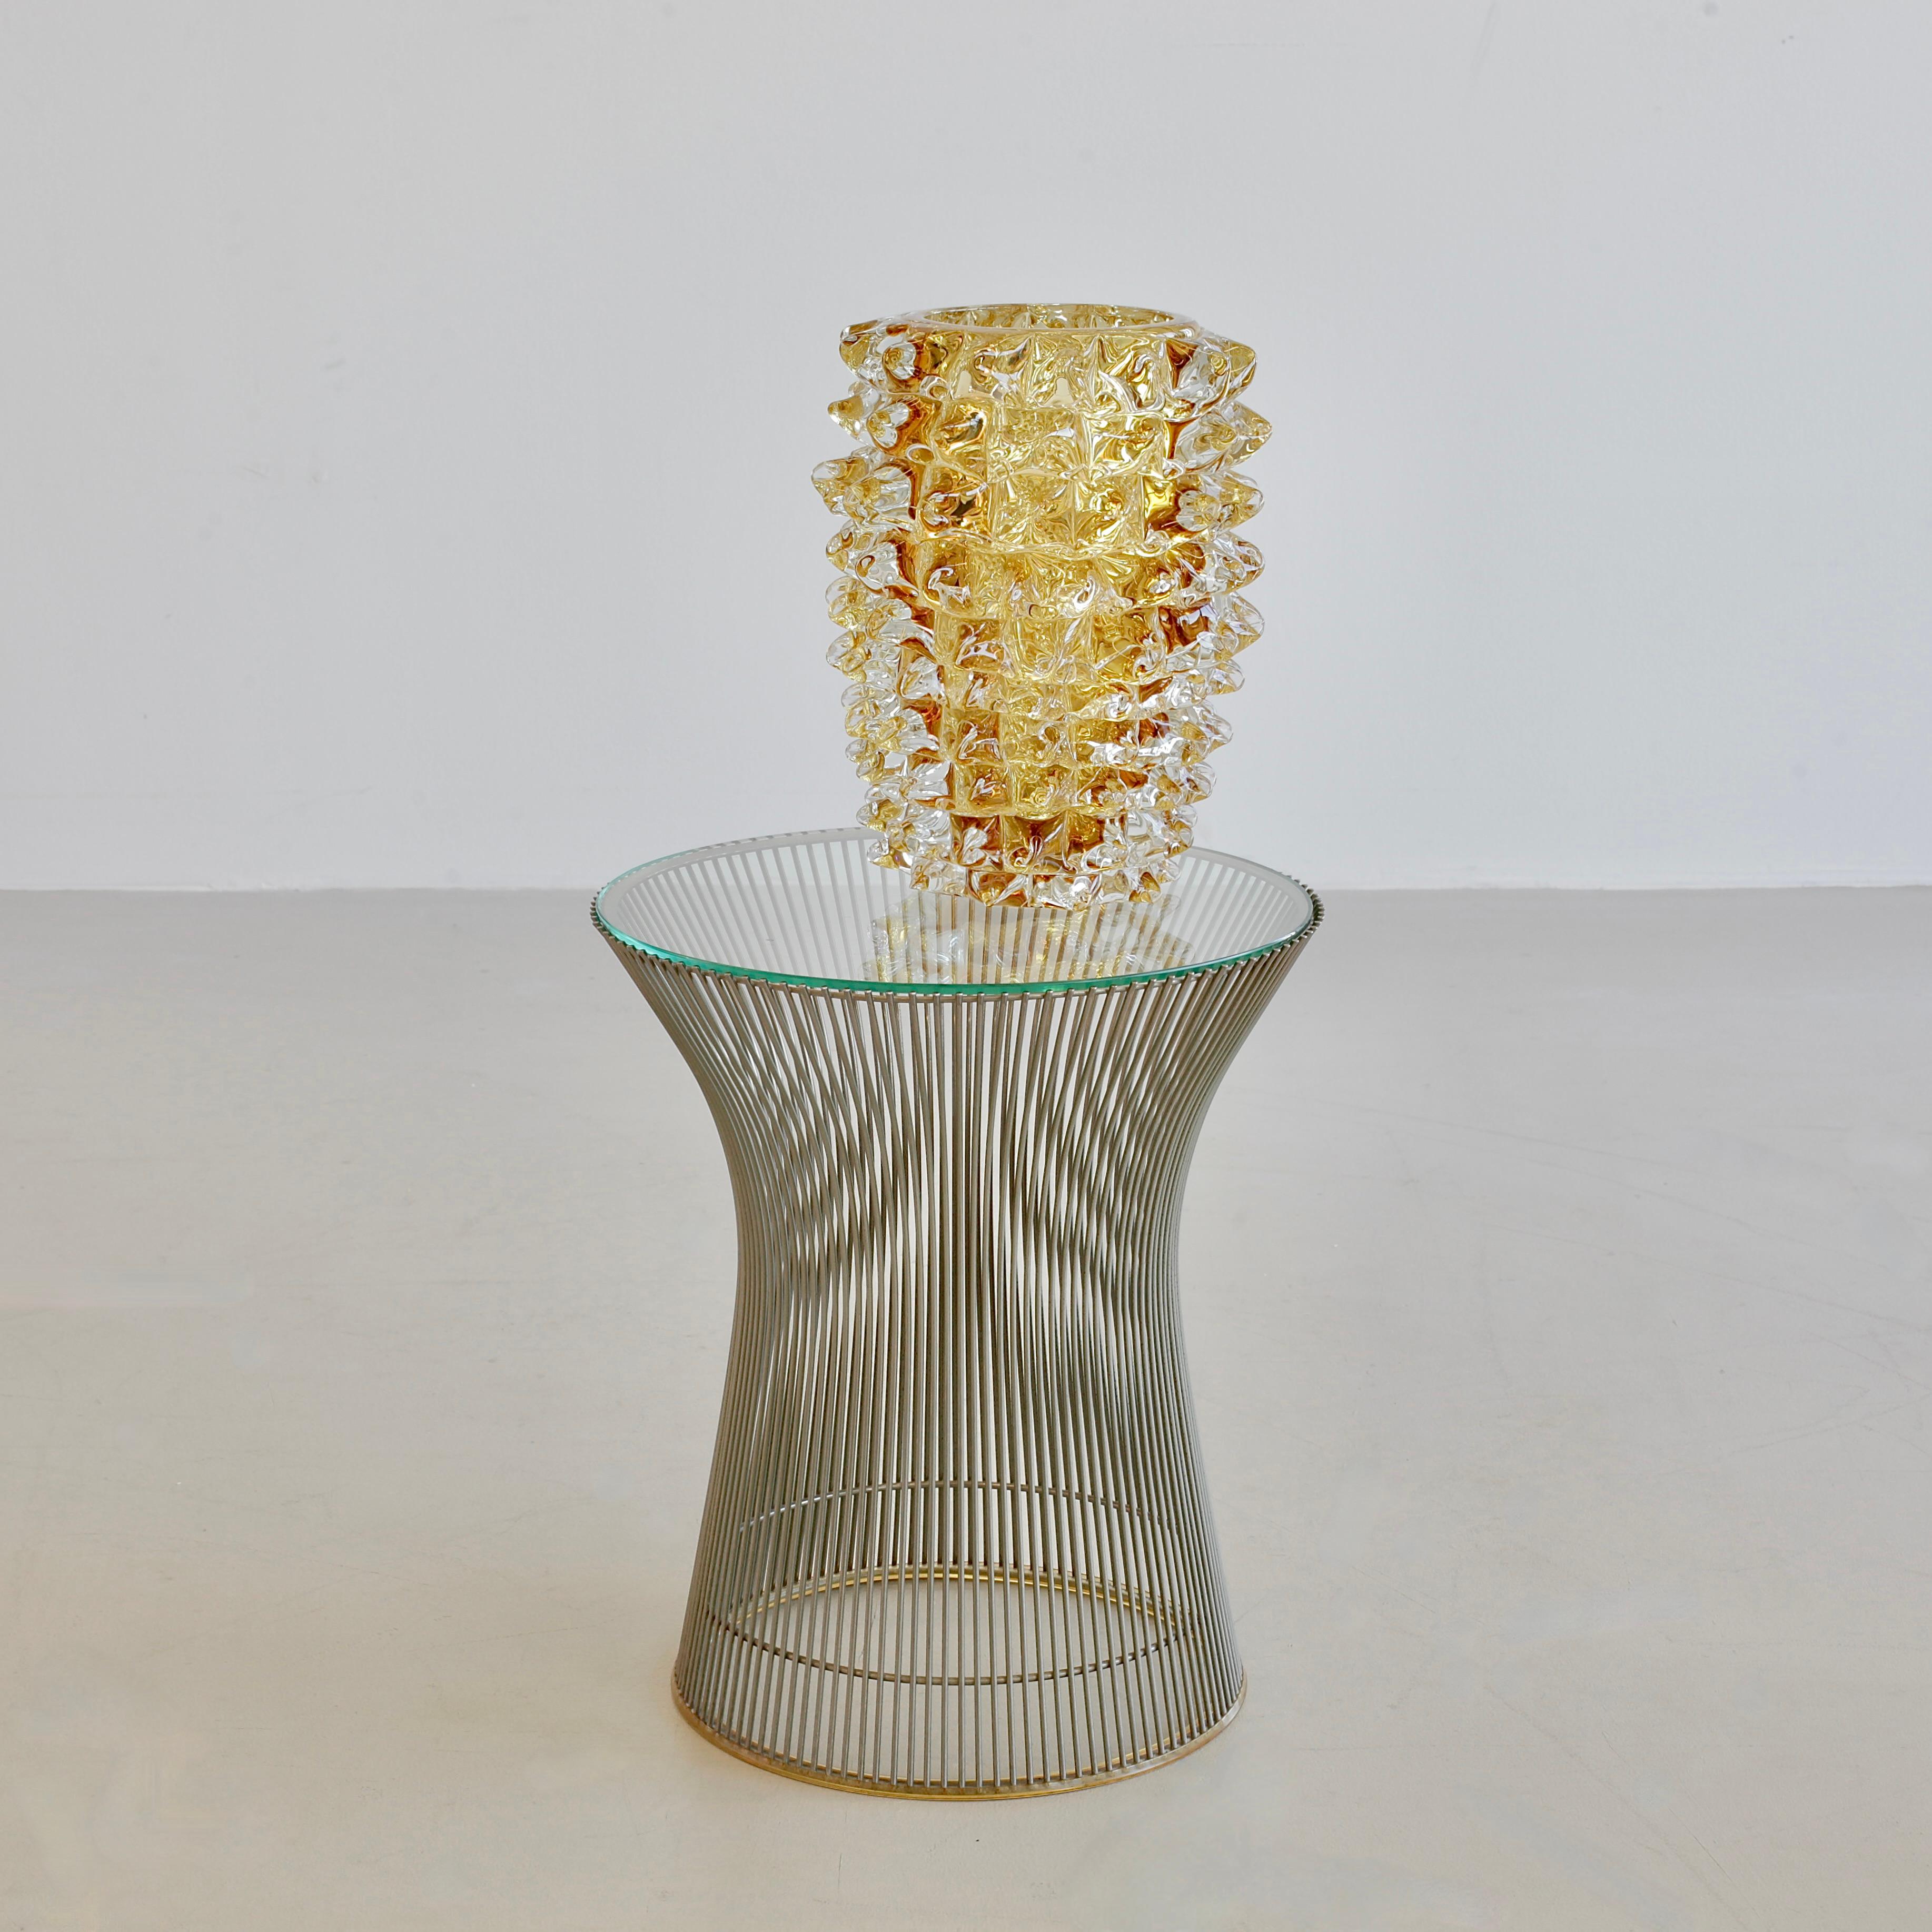 Large hand-blown glass vase, Italy, Murano.

Yellow glass vase with spikes, engraved with signature on base. Heavy and decorative piece, made in Murano.

 